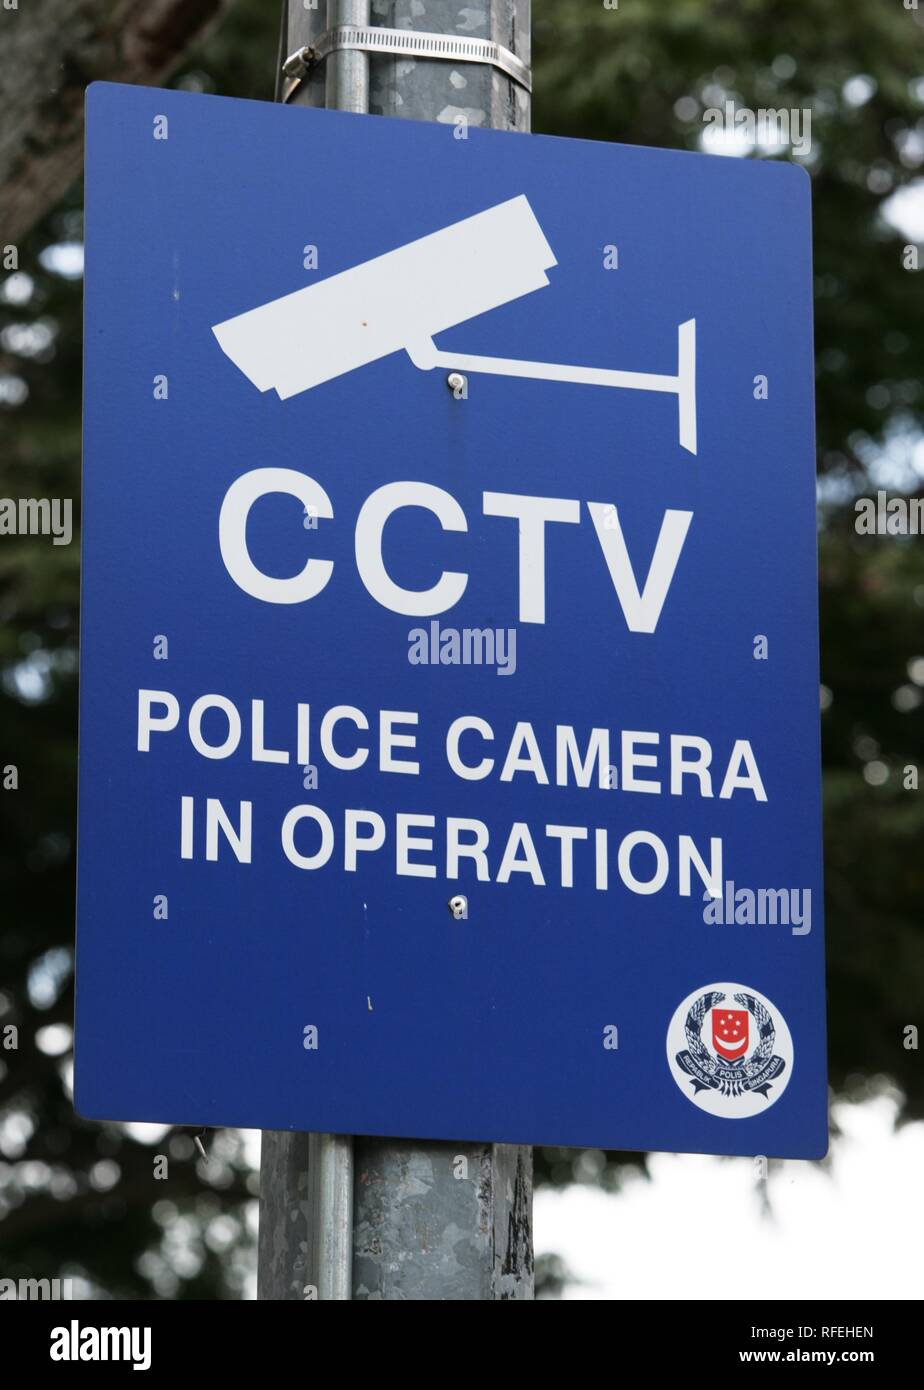 SGP Singapore: Little India CCTW Police Camera in operation. | Stock Photo